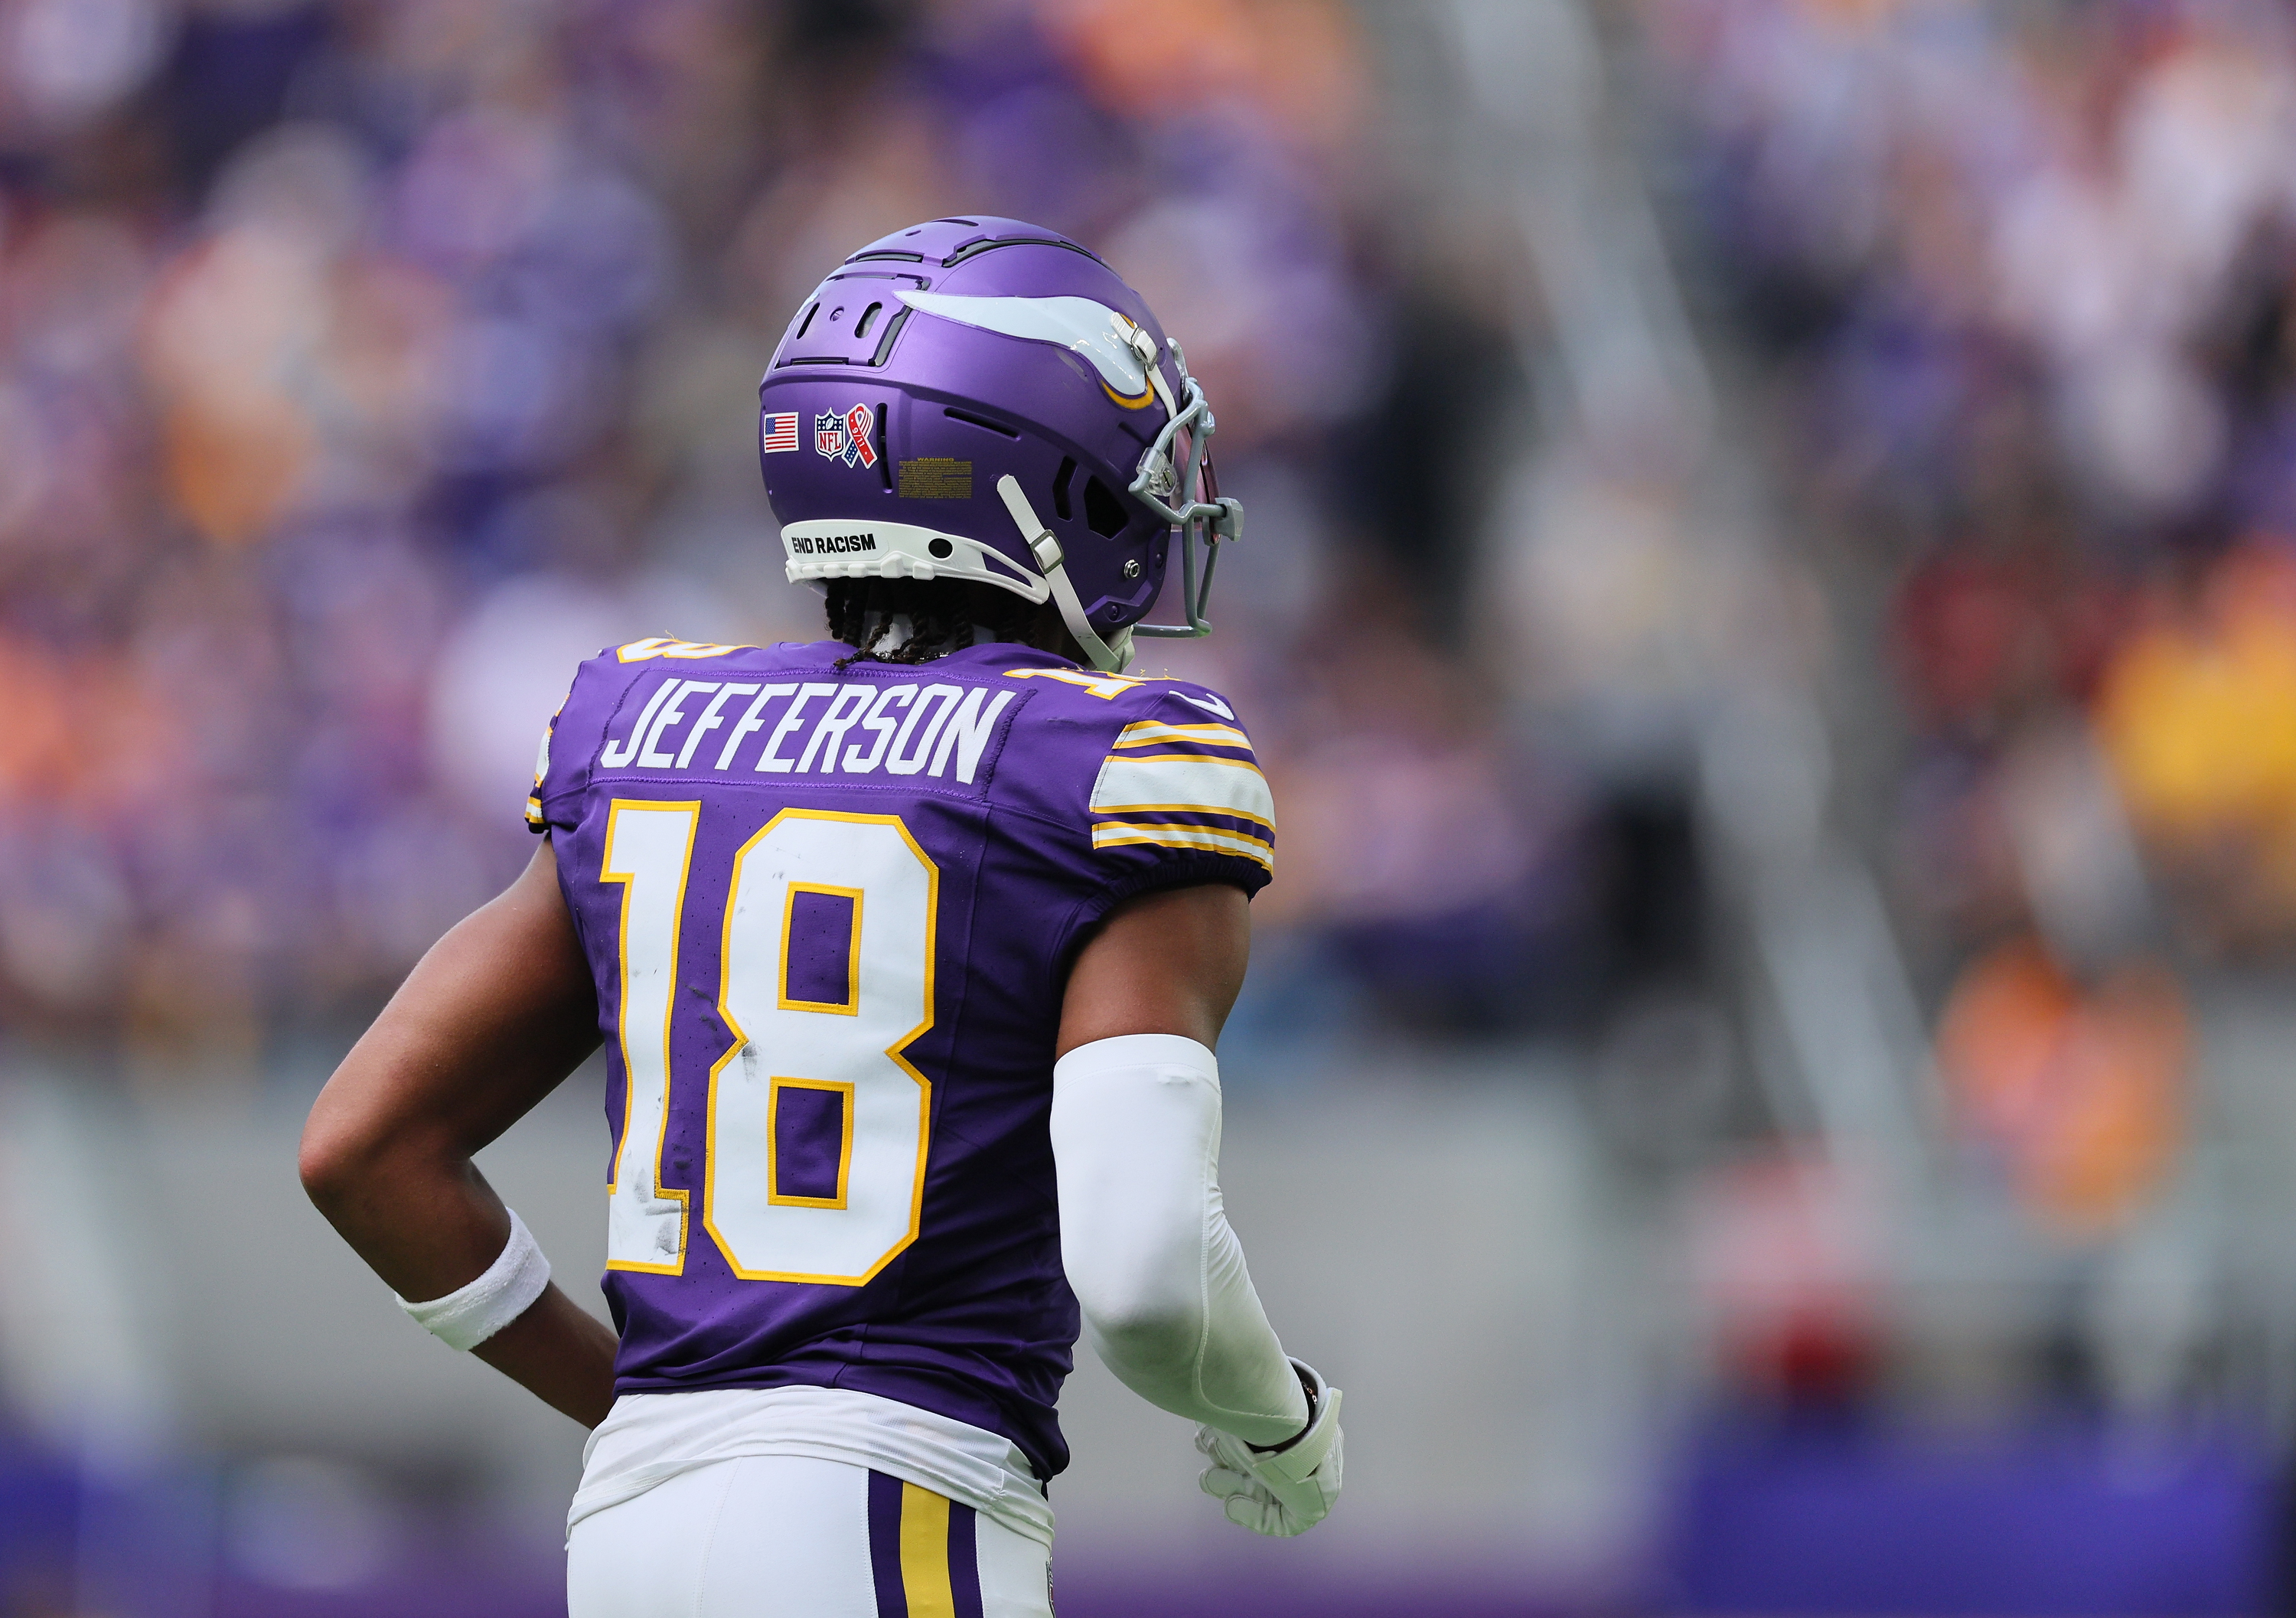 Vikings place star WR Justin Jefferson on IR, out at least 4 weeks